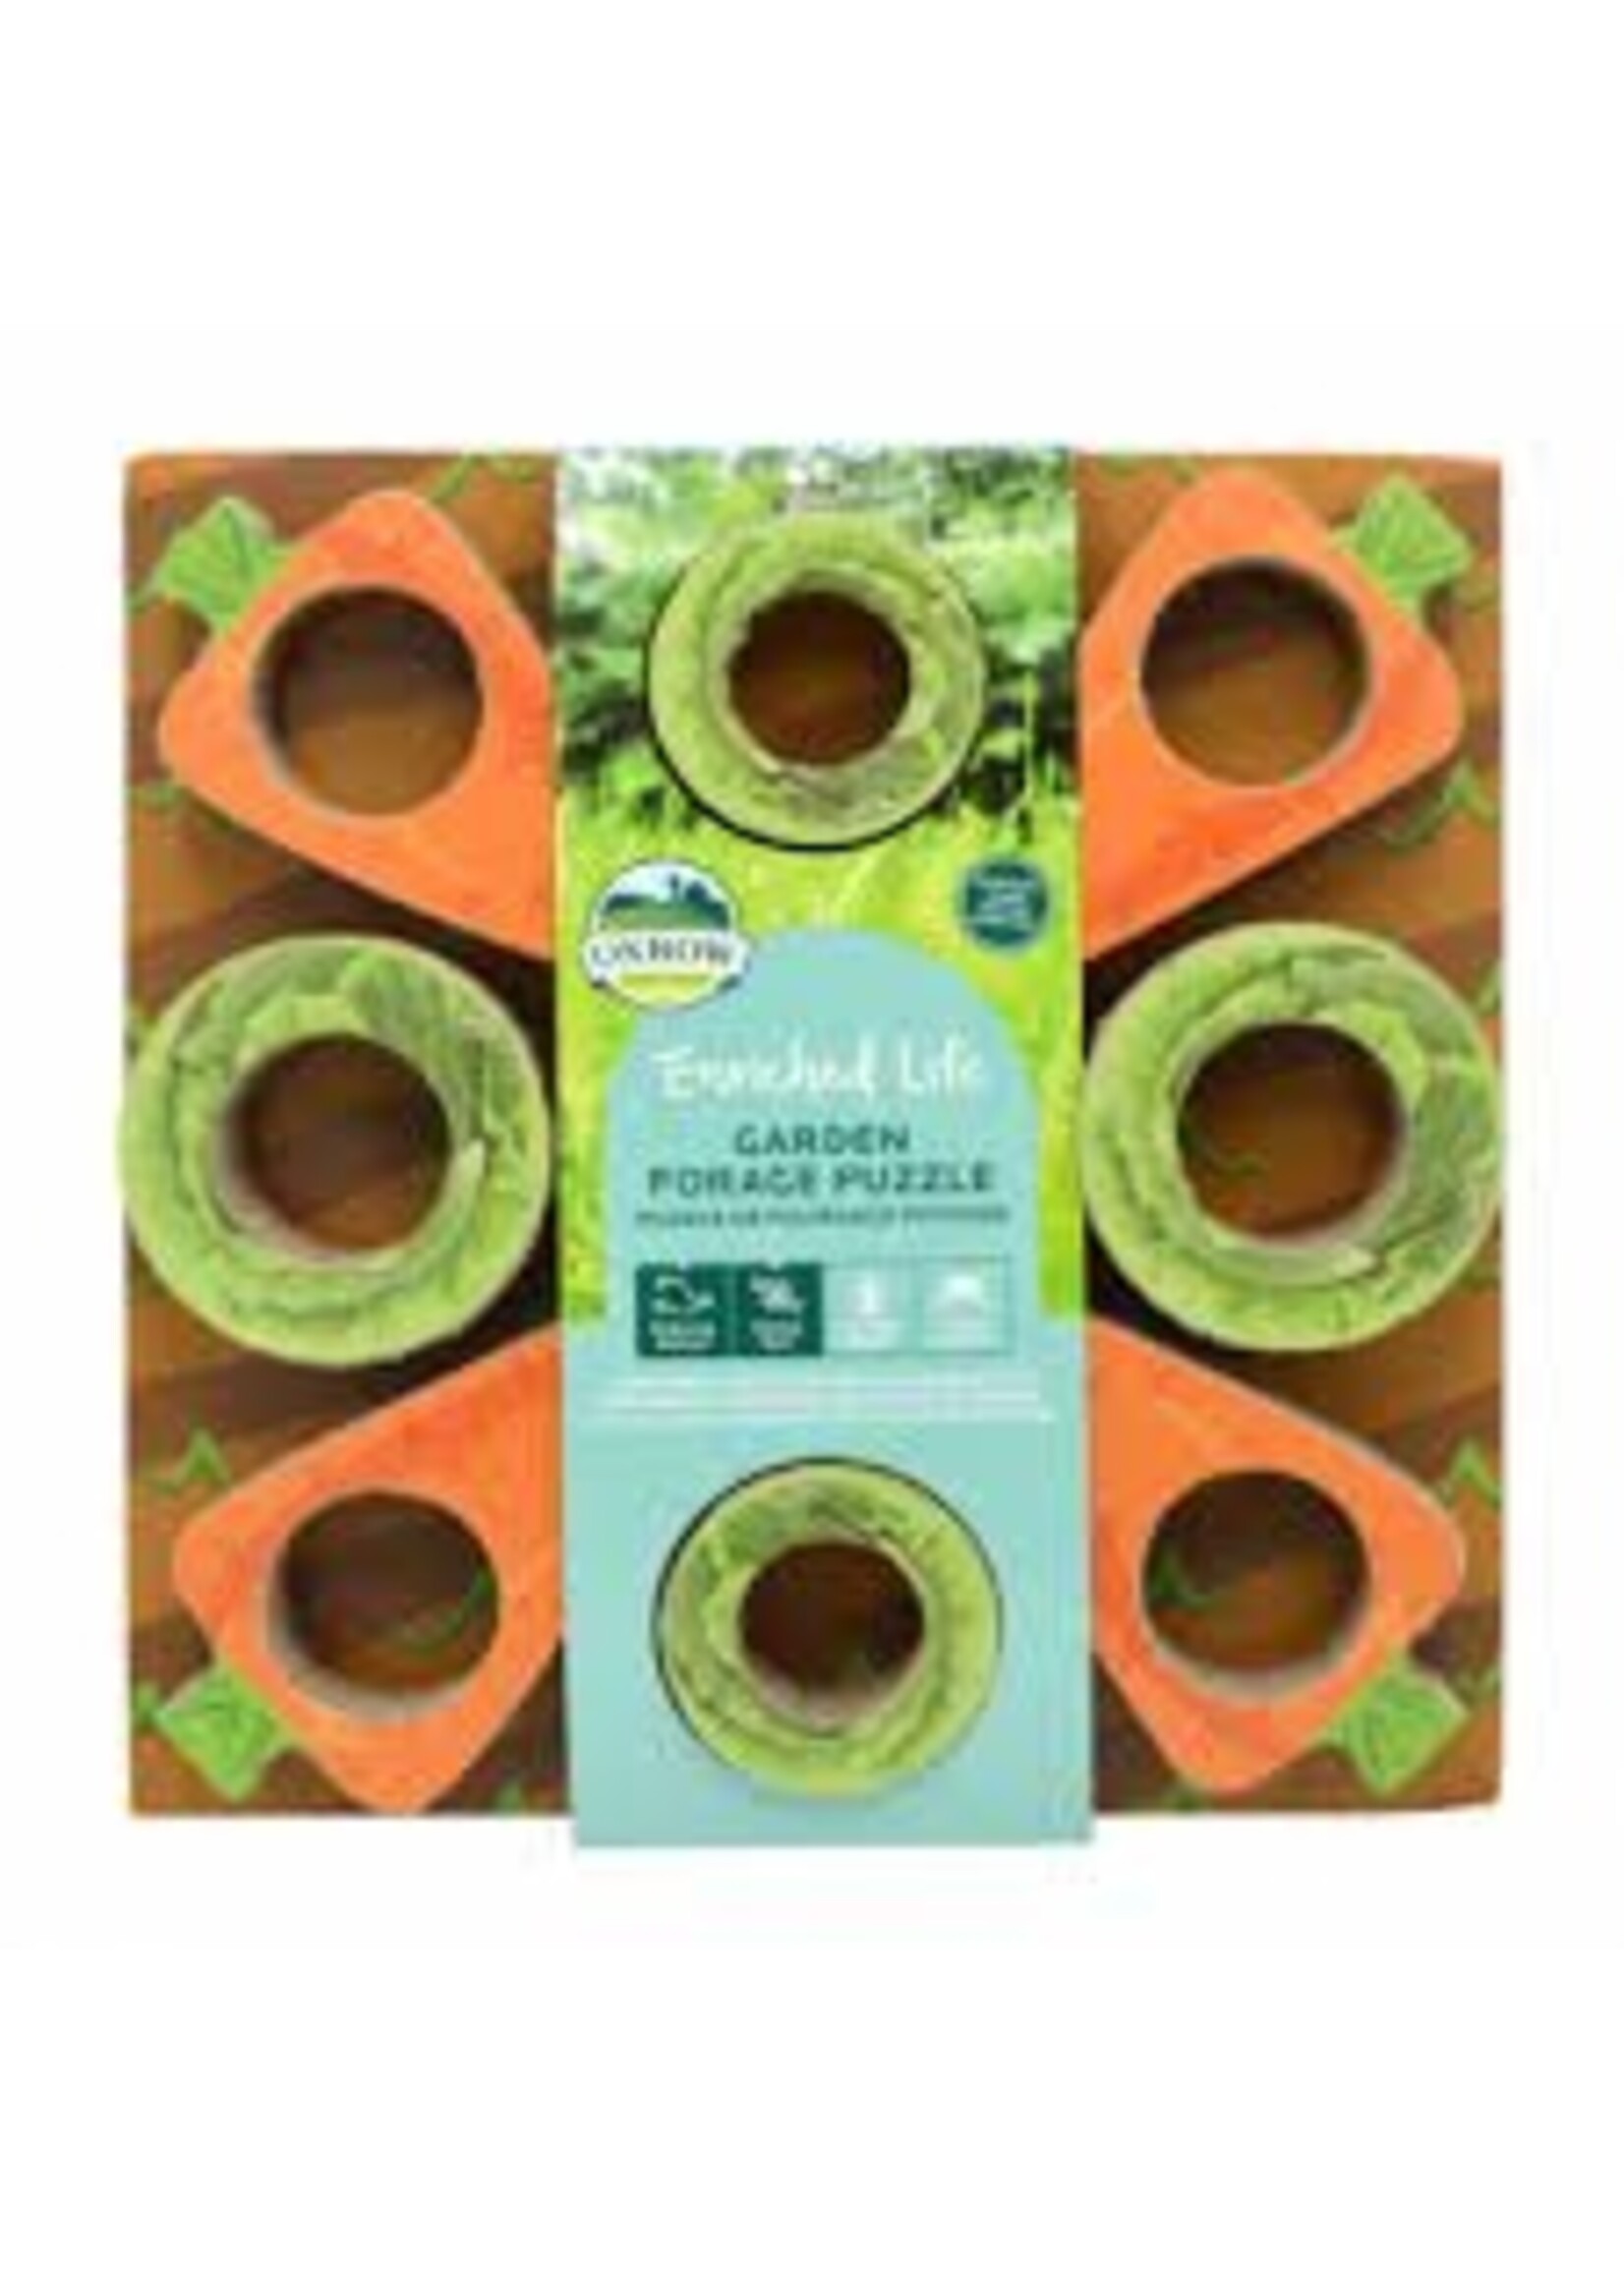 Oxbow Oxbow Enriched Life Garden Forage Puzzle